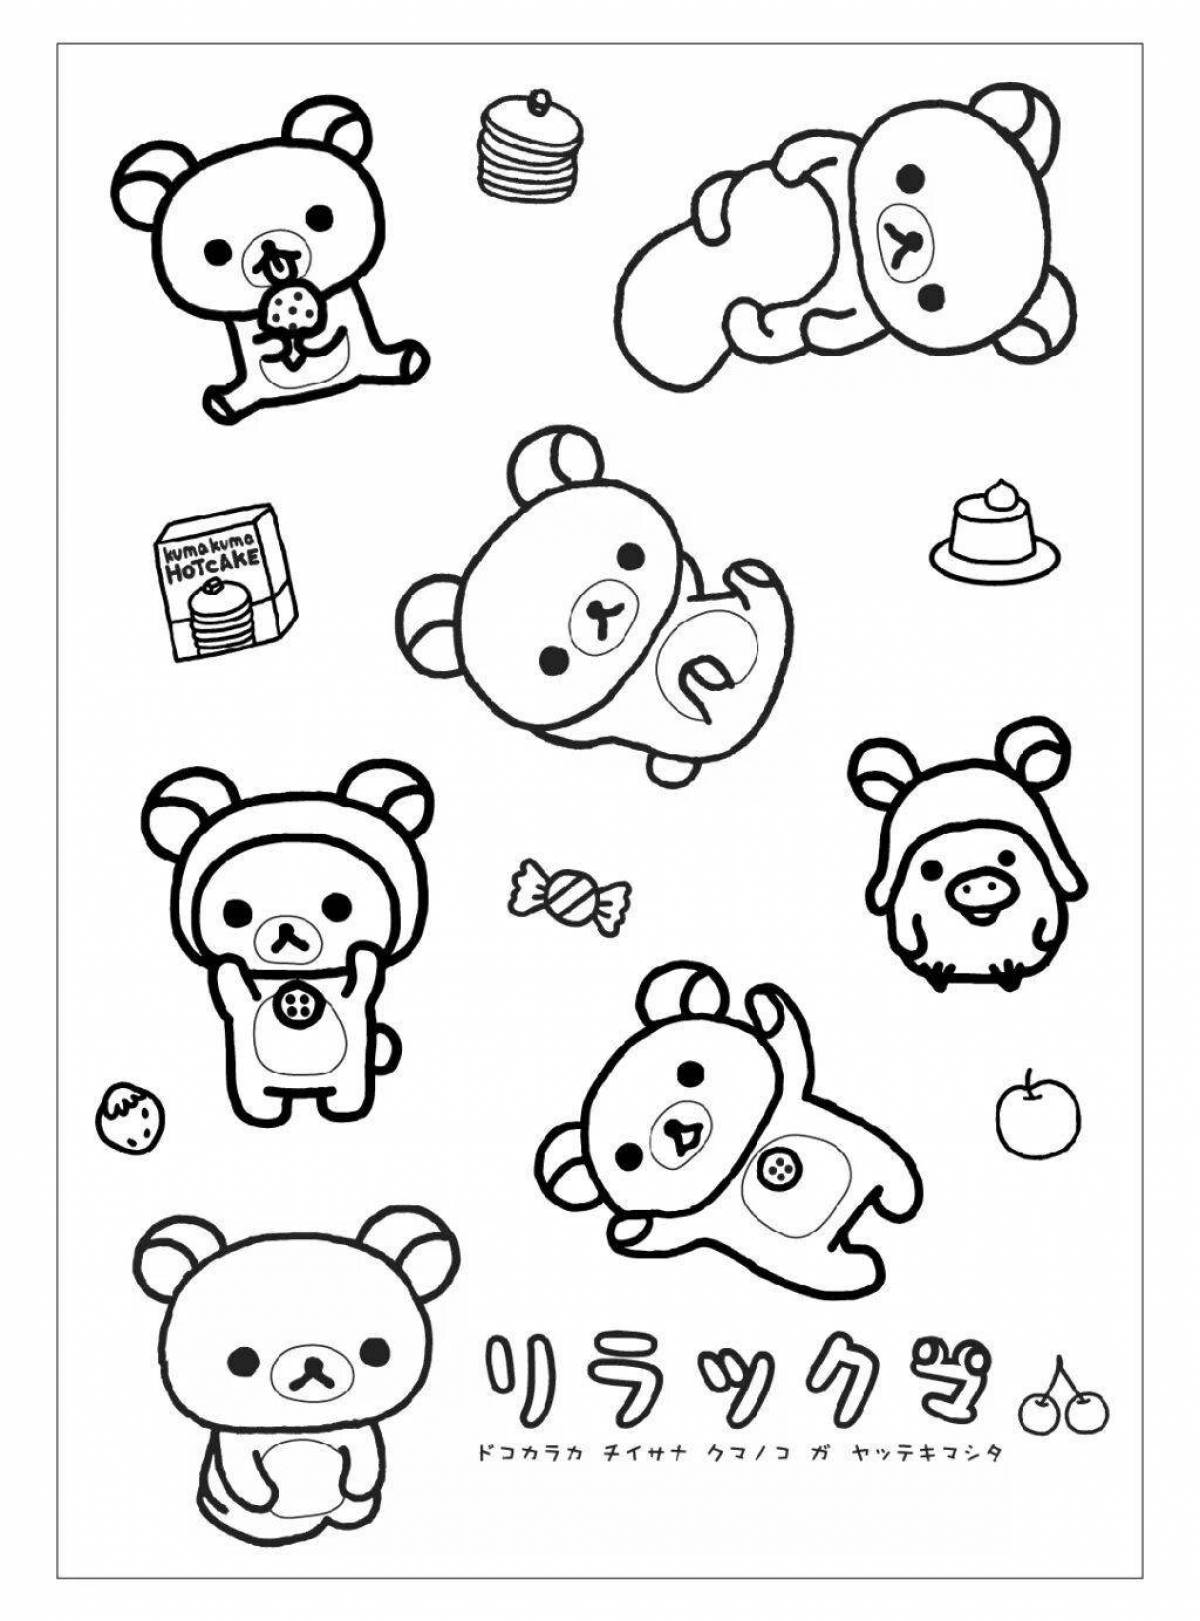 Sky coloring cute kids for stickers